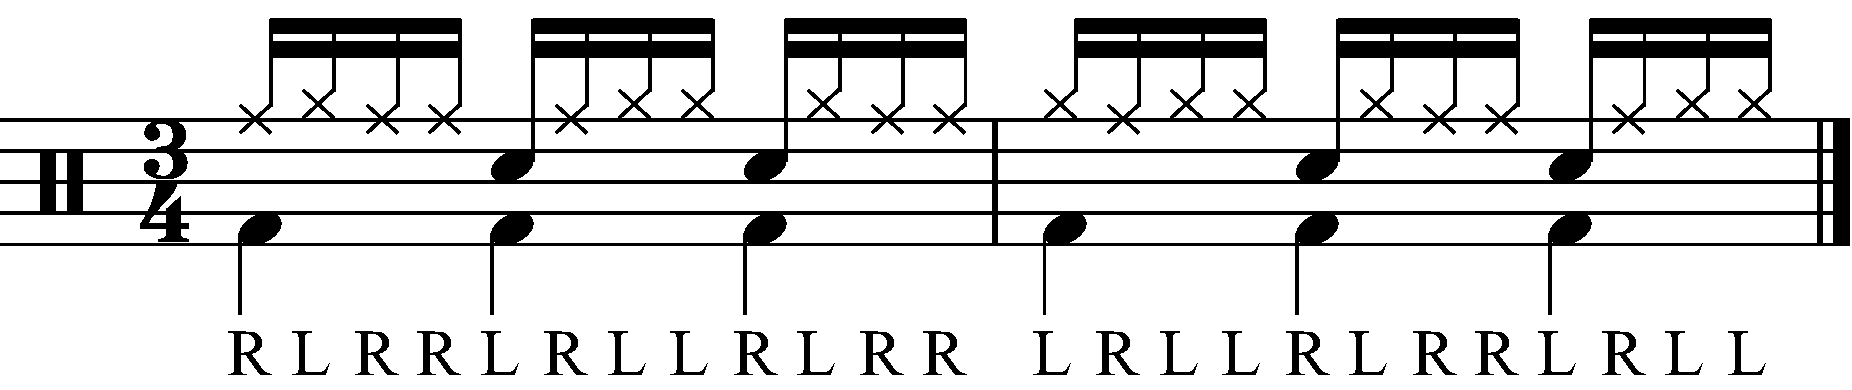 A 3/4 waltz paradiddle groove